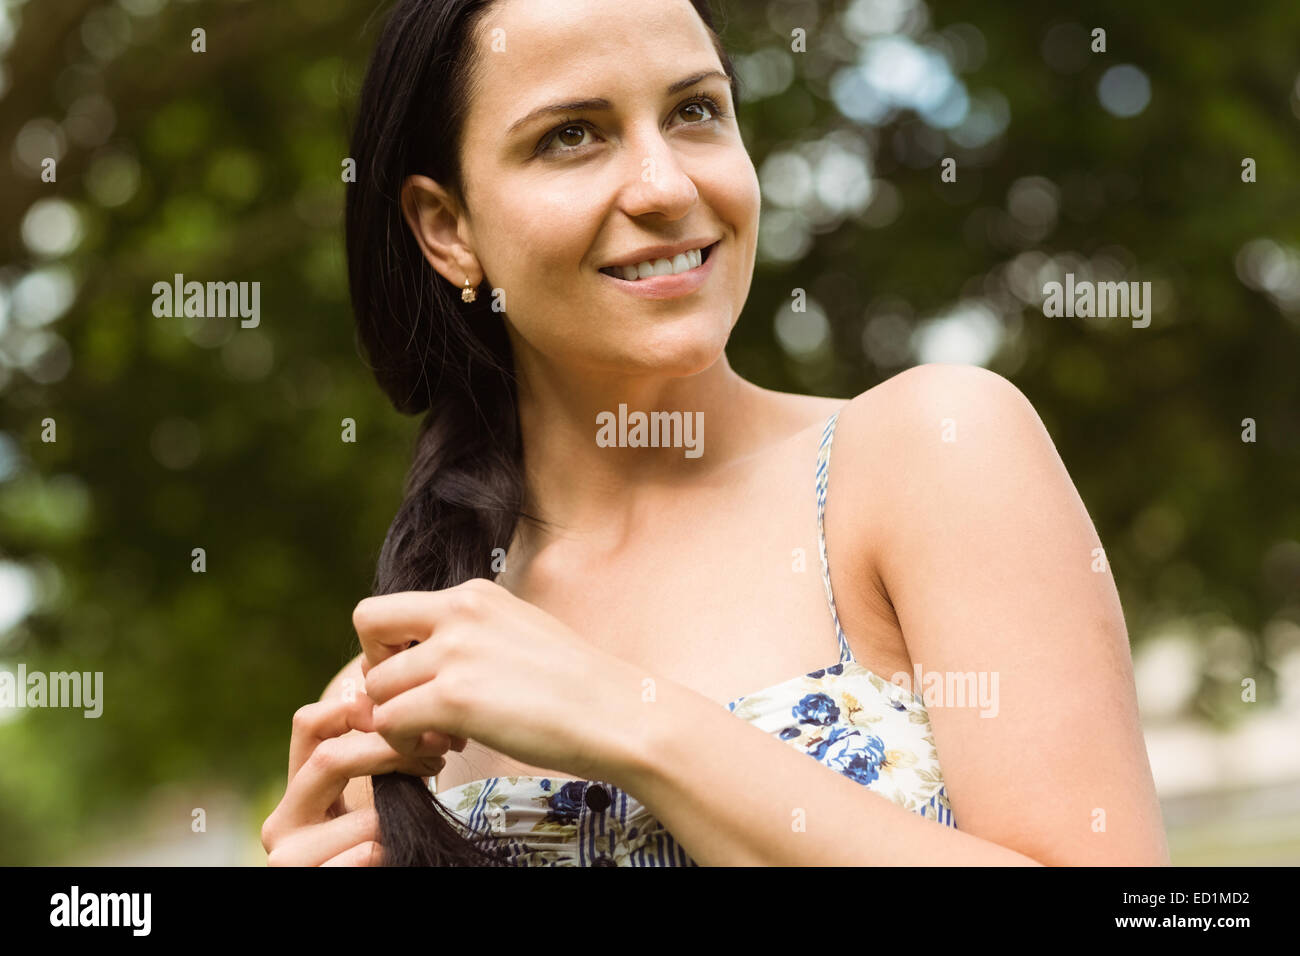 Portrait of a brunette in dress with braid Stock Photo